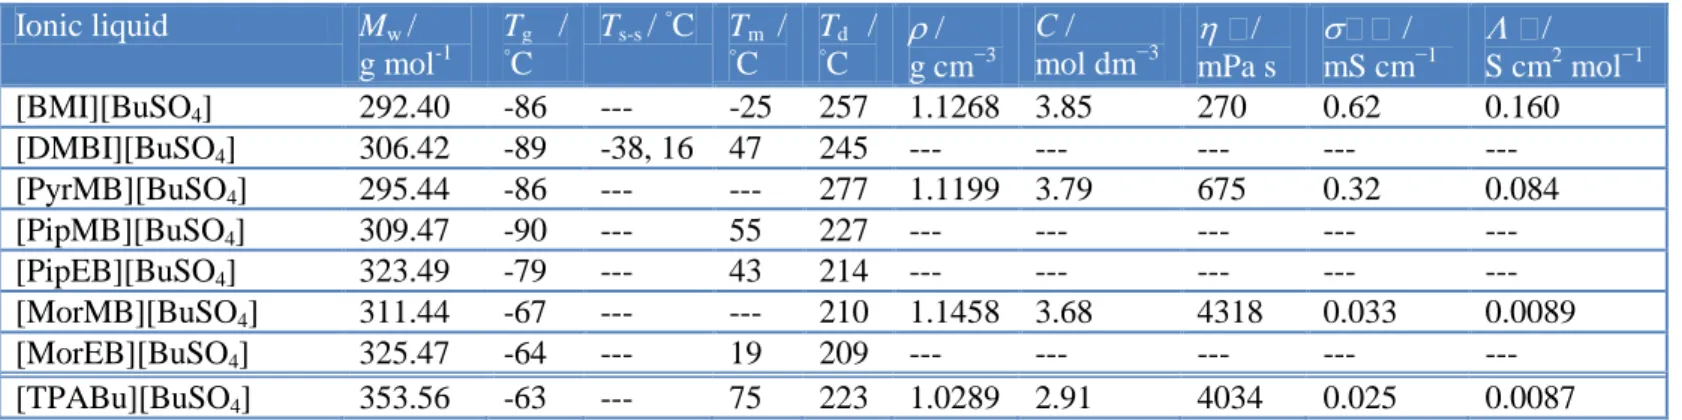 Table  2  summarizes  the  melting  points  and  glass  phase  transitions  along  with  the  thermal  decomposition  onset  temperatures  and  physicochemical  quantities  of  density  (),  viscosity  (),  conductivity  (σ),  and  concentration  (C)  at